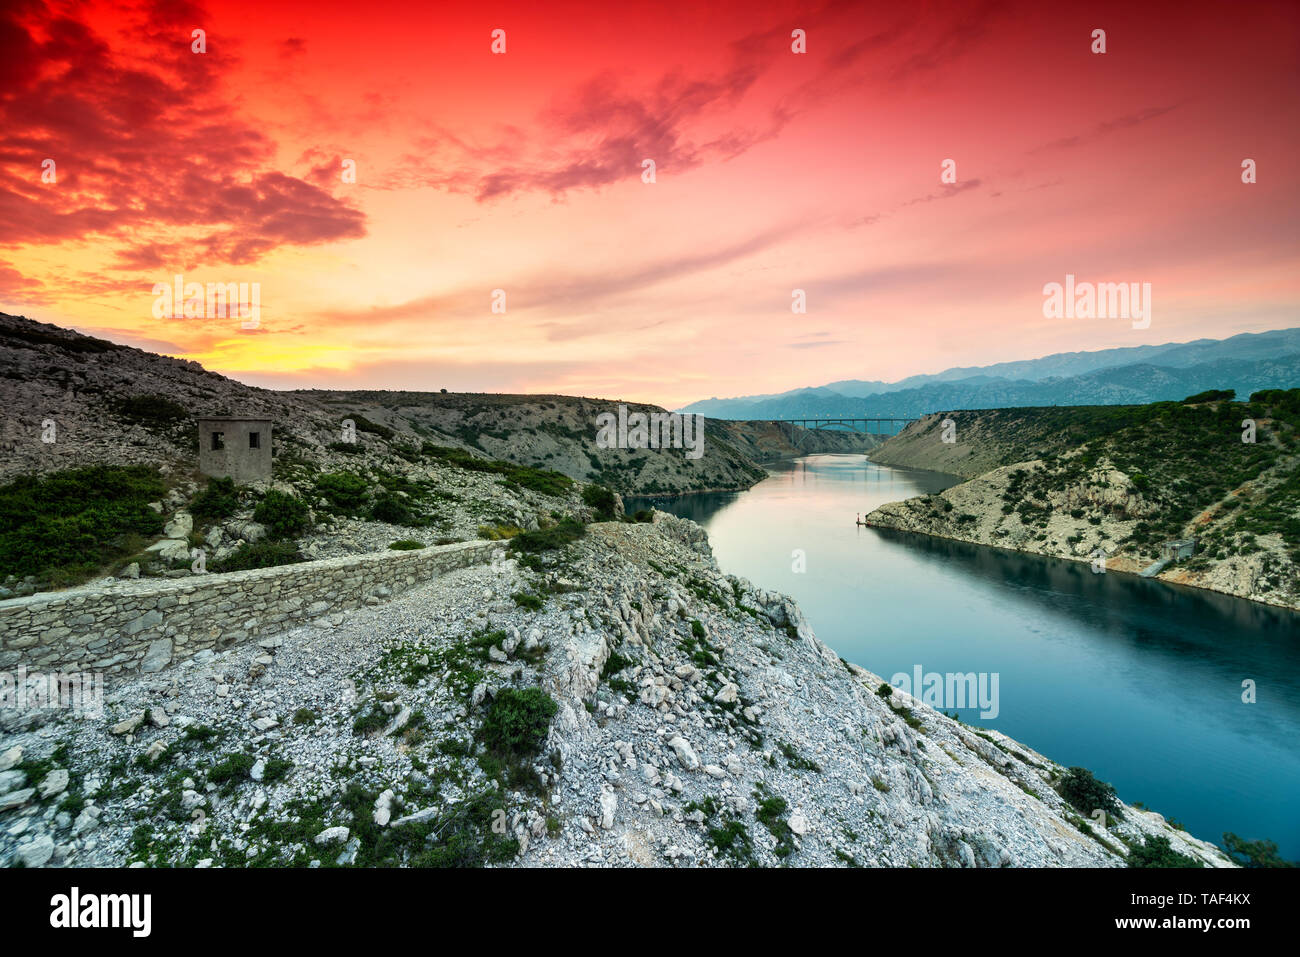 Colorful evening scenic view from Maslenica bridge over the river and mountains with dramatic sunset sky in Dalmatia, Croatia. Wide angle, long exposu Stock Photo